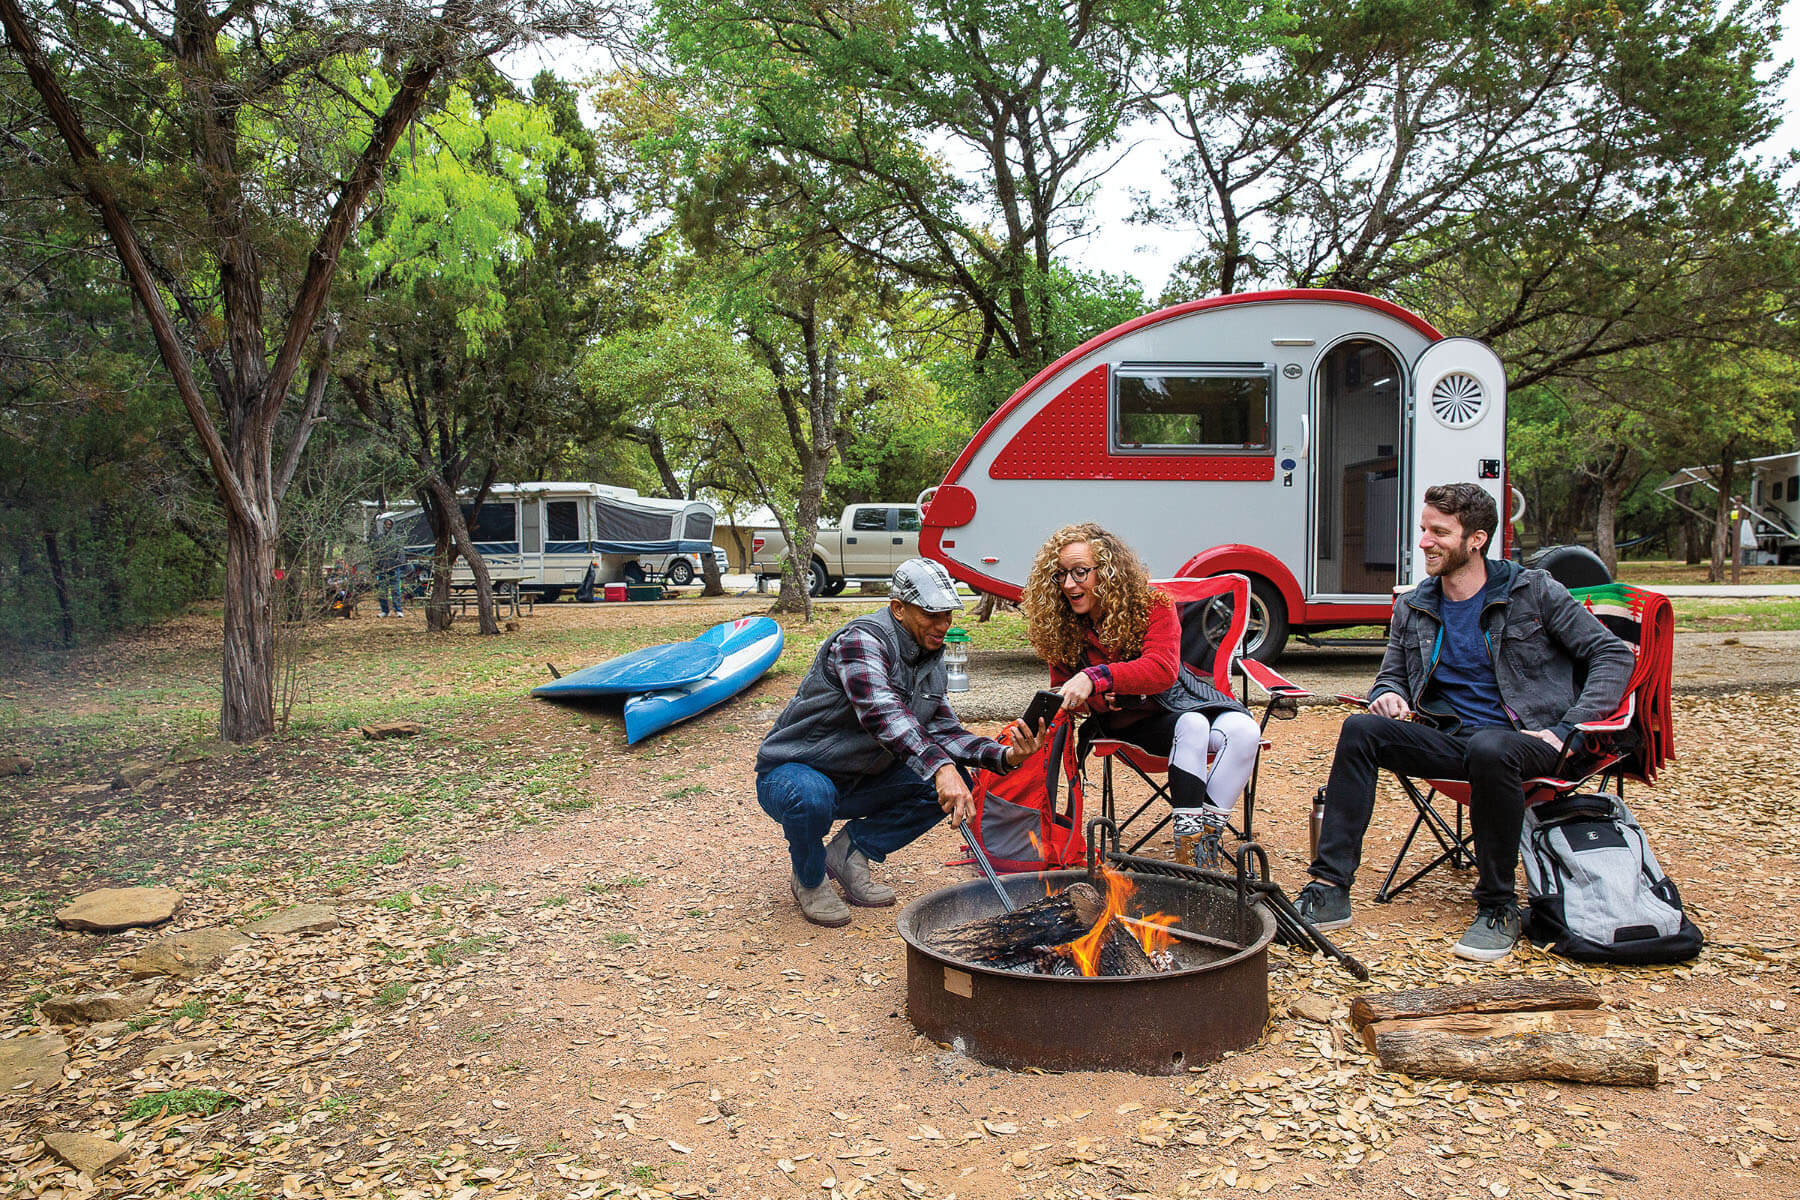 A group of people sit in front of a red, teardrop-shaped camper around a campfire in a wooded setting